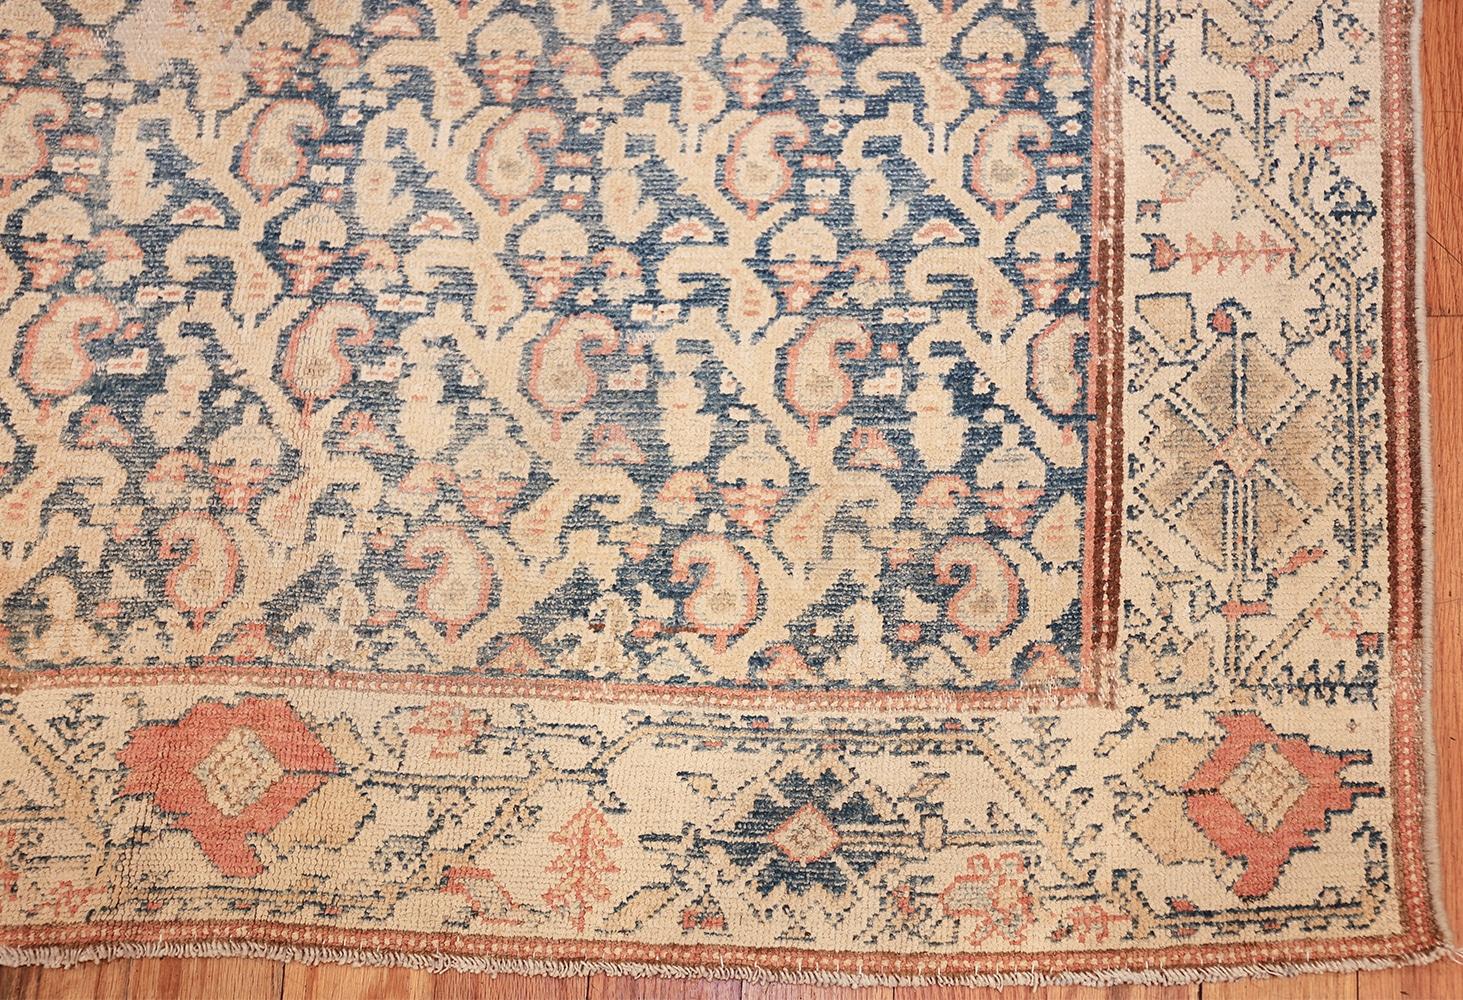 Hand-Knotted Antique Persian Paisley Design Malayer Rug. 4' 3